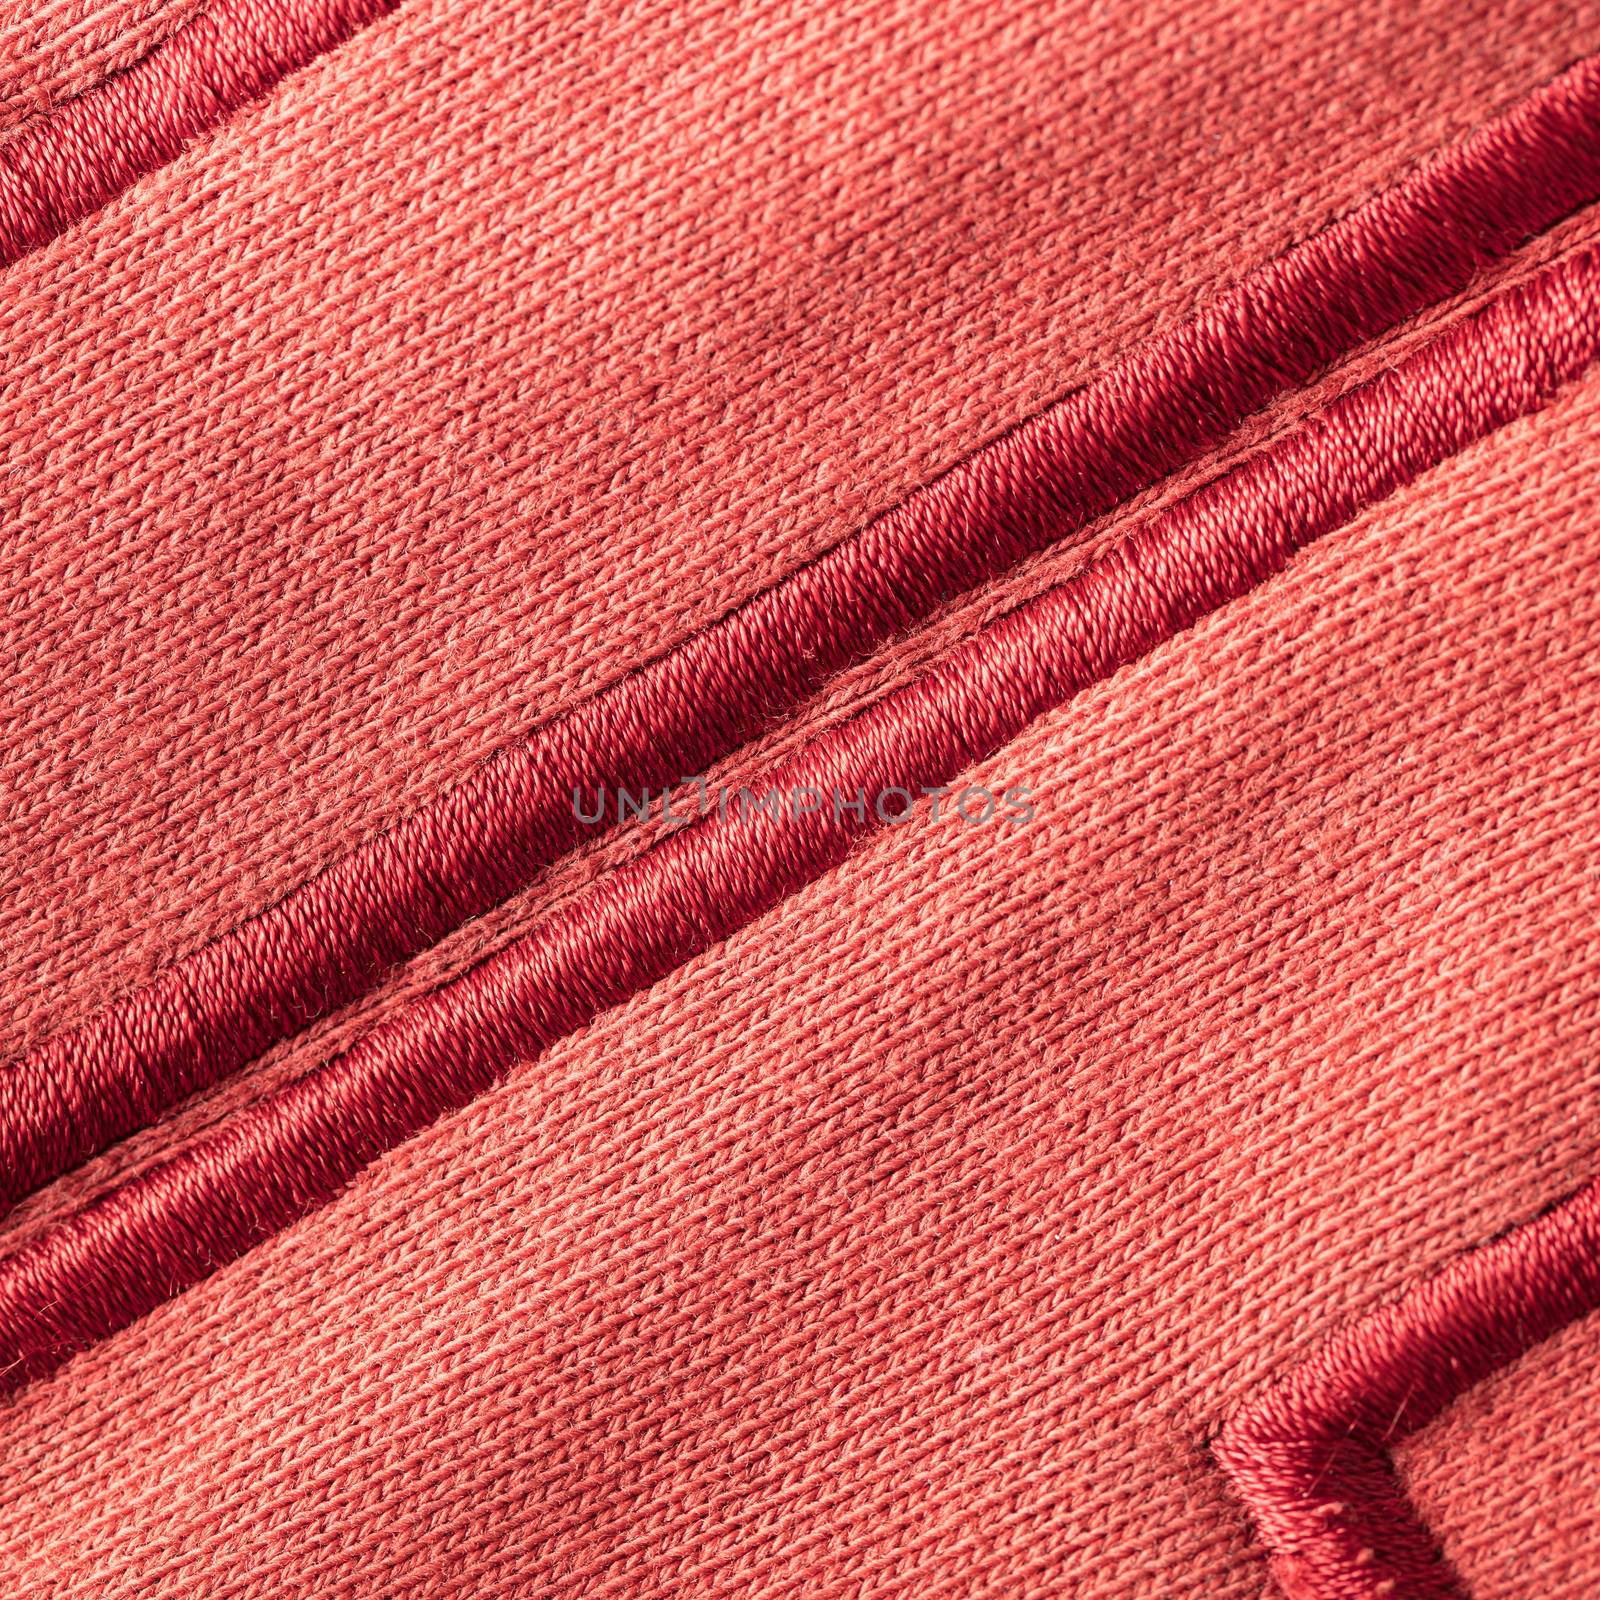 texture of a knitted fabric by MegaArt